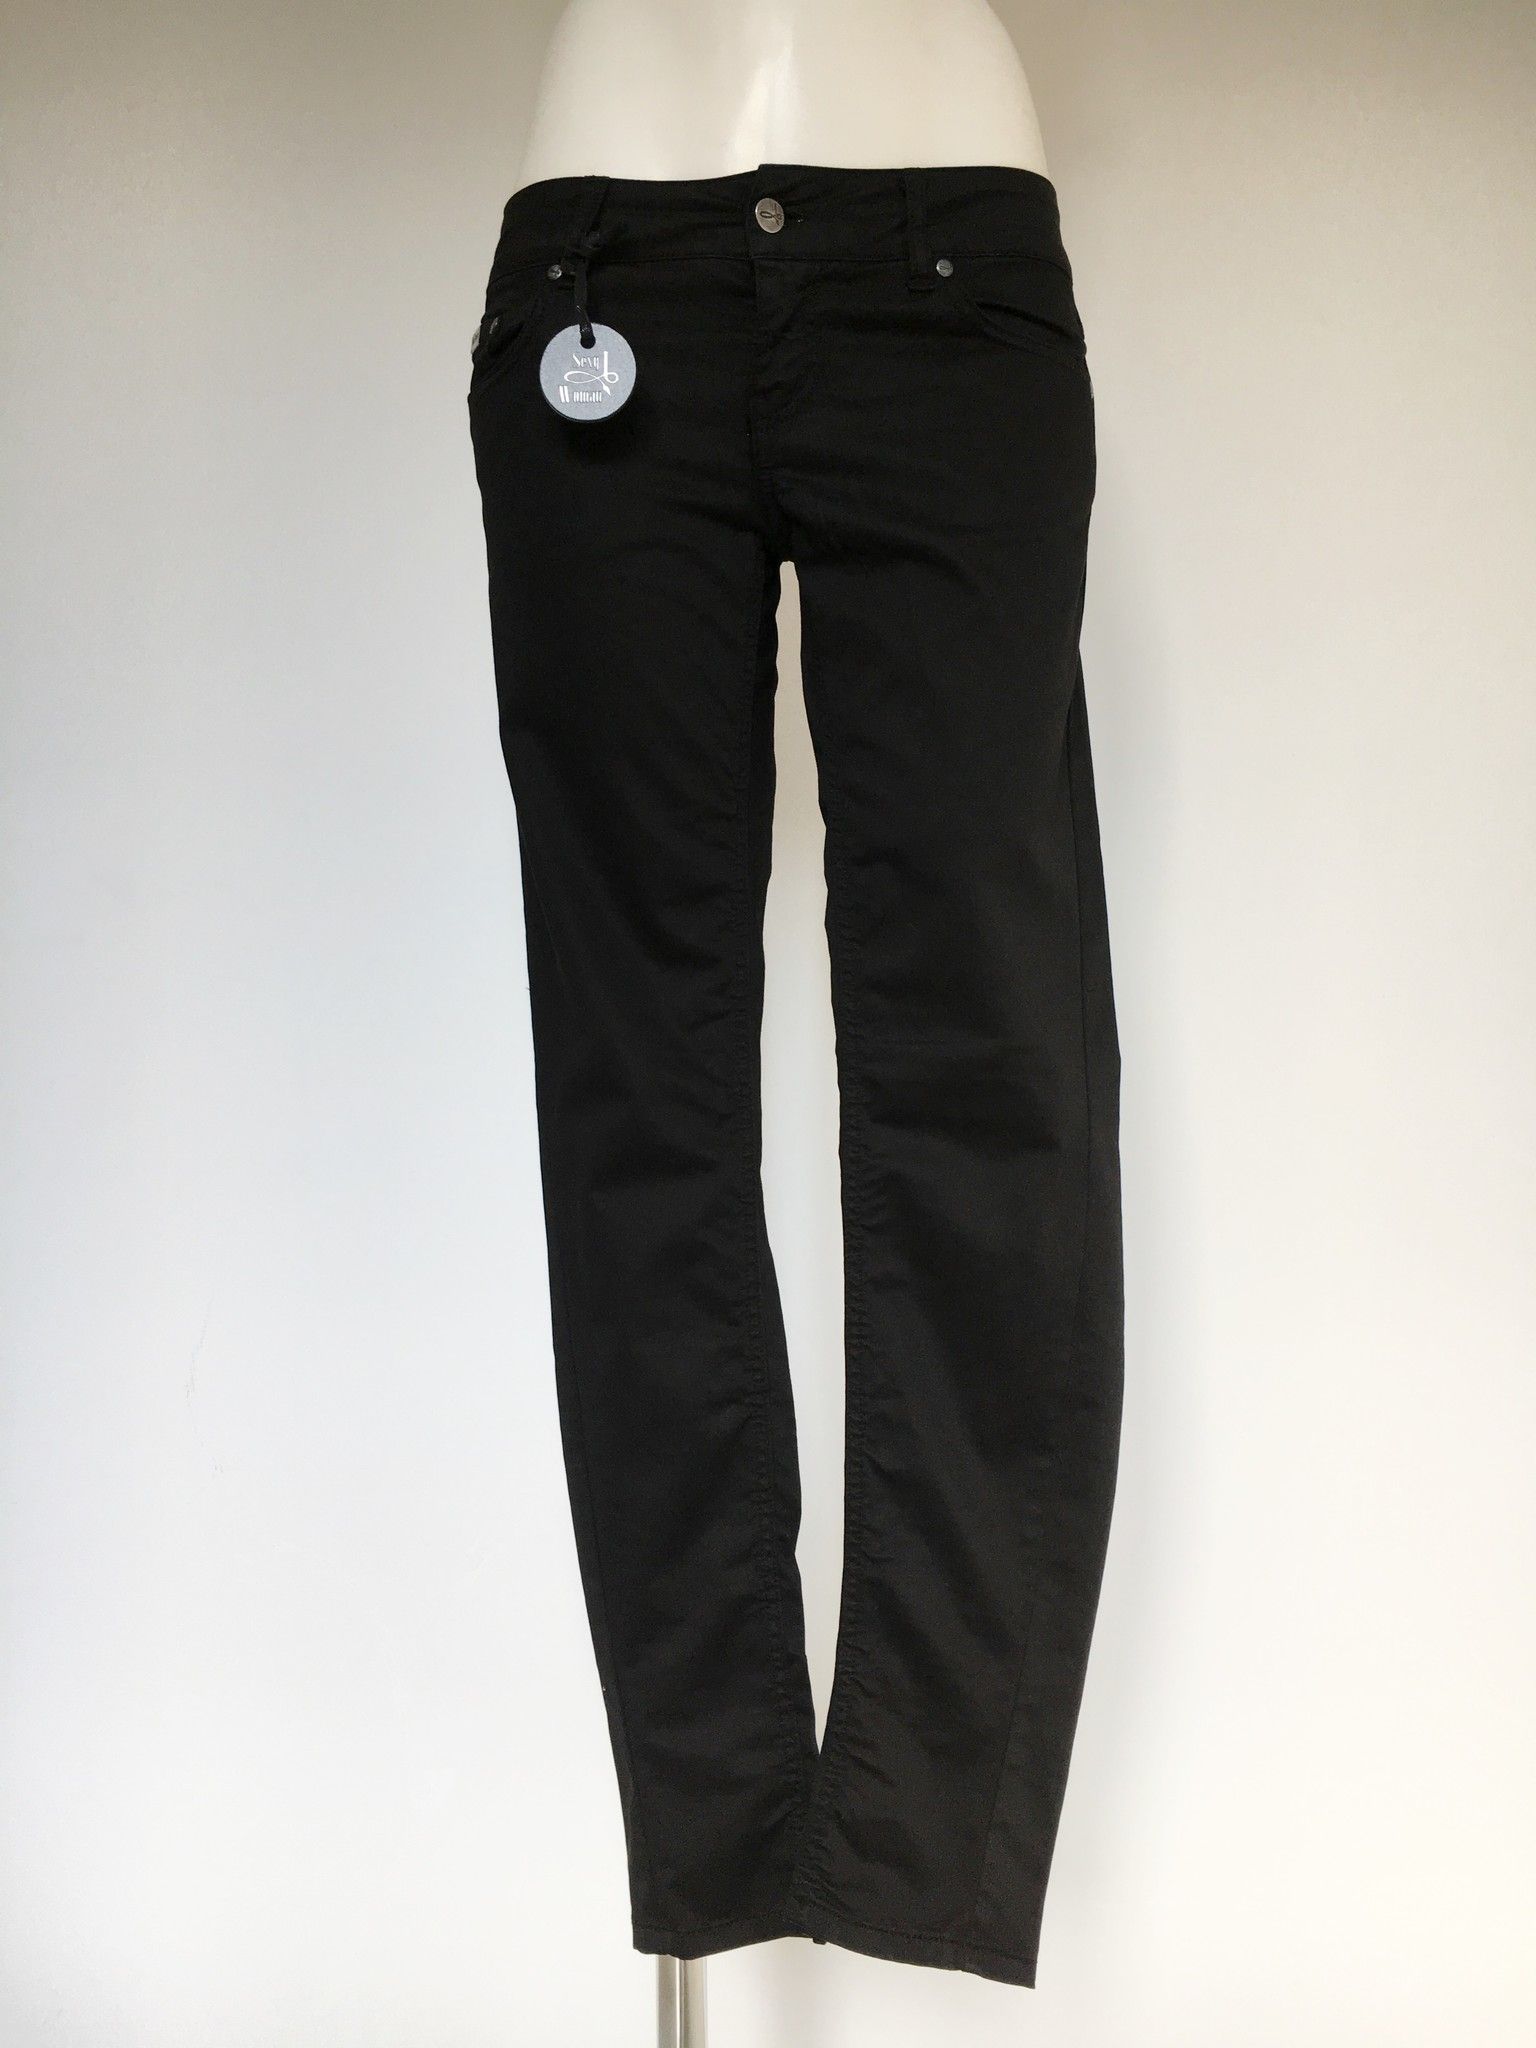 Sexy Woman 5 Pockets Long Jeans Cod.5A29